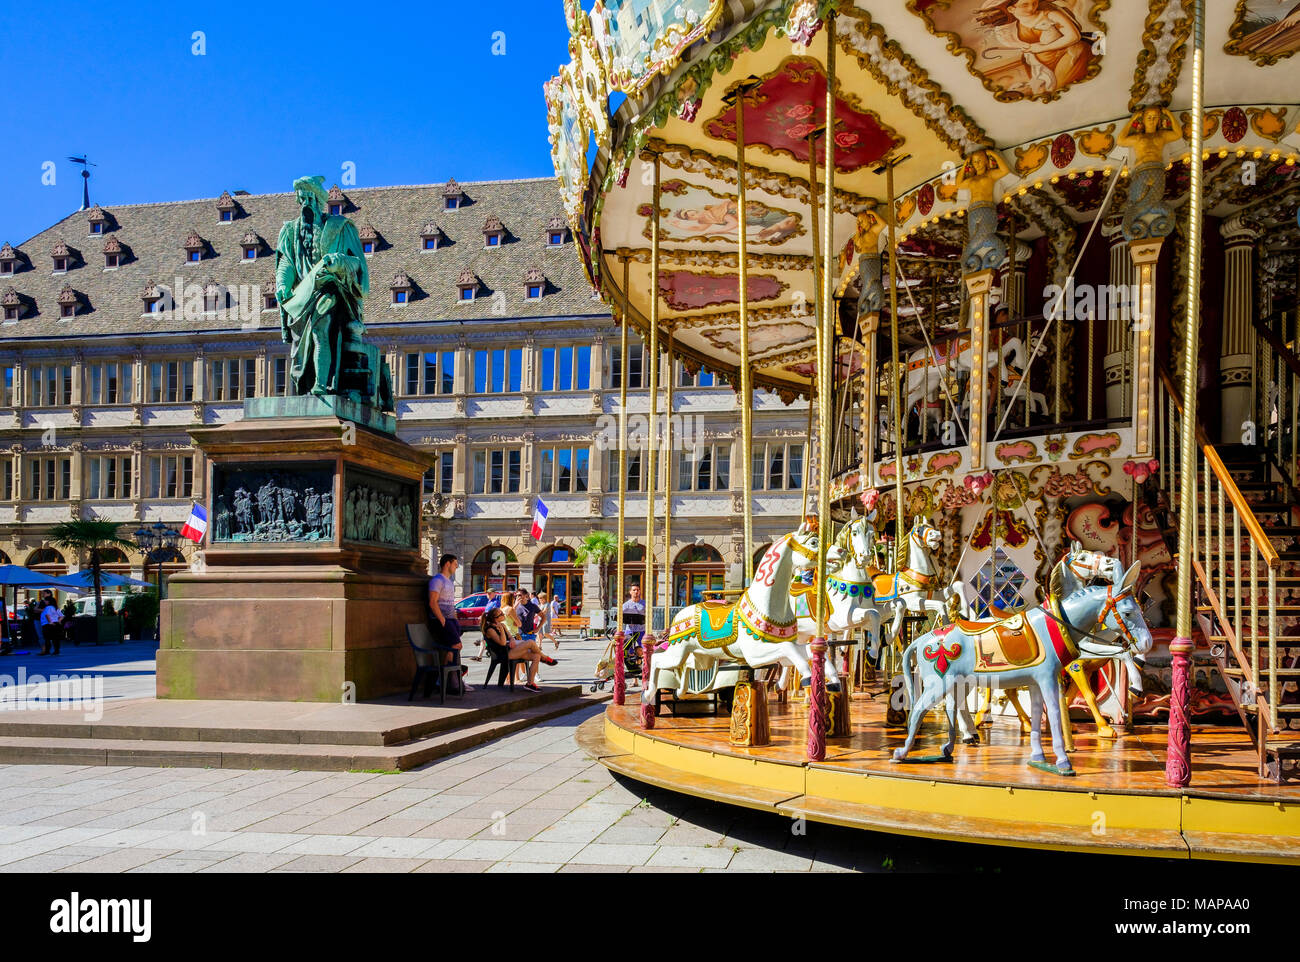 Merry-go-round, Gutenberg statue, Chamber of Commerce building, Place Gutenberg square, Strasbourg, Alsace, France, Europe, Stock Photo